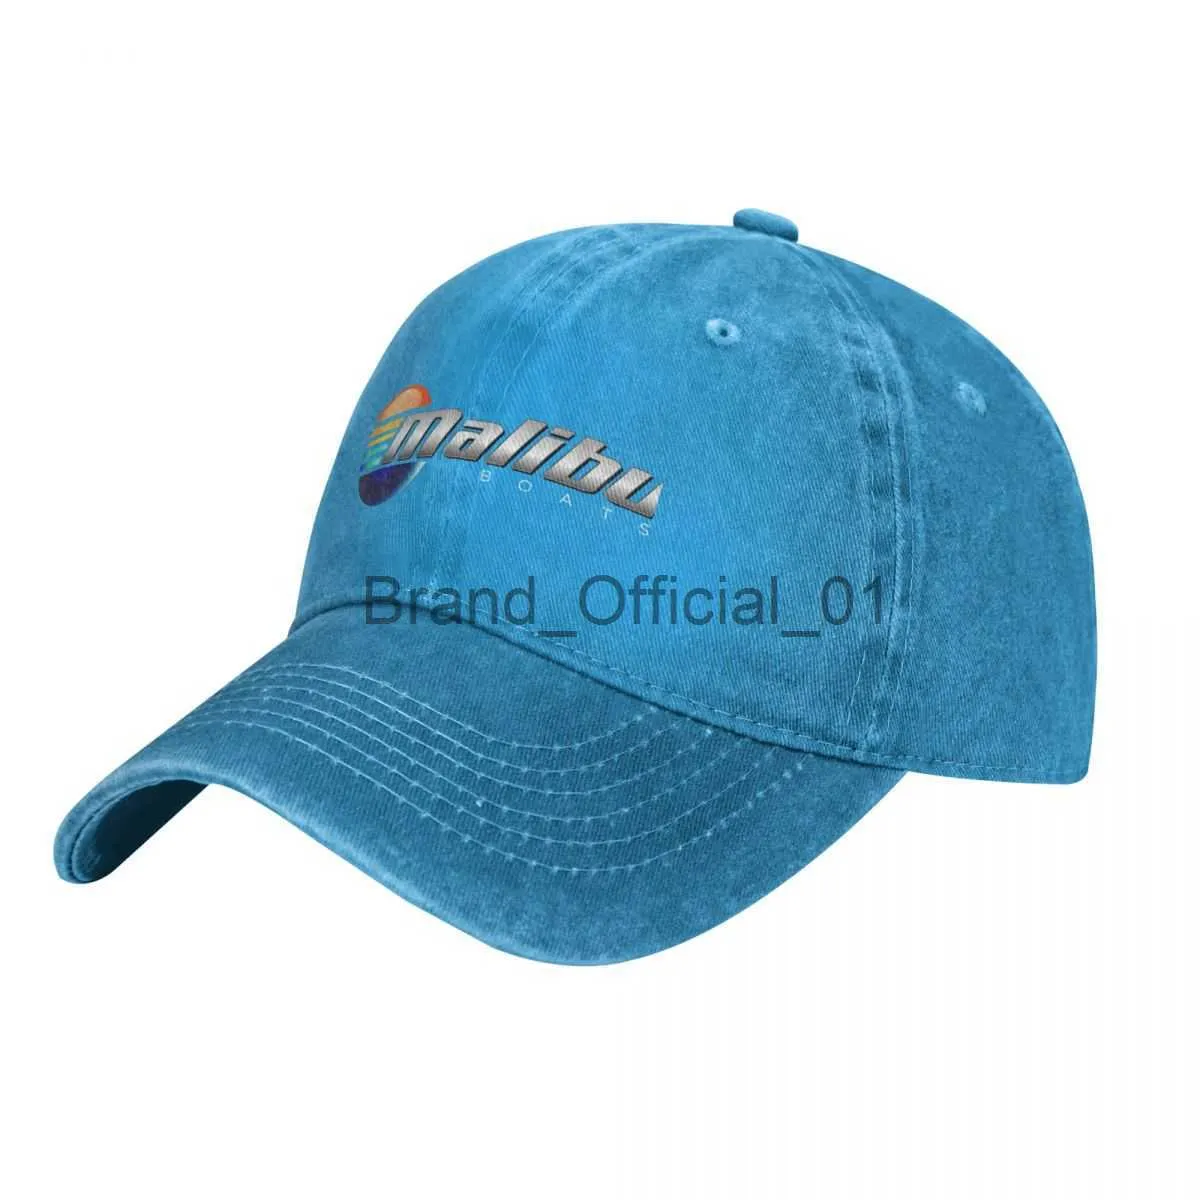 Malibu Boats Husqvarna Baseball Cap Unisex Fishing, Rugby, And Sports Hat  Style X0815 From Brand_official_01, $10.04